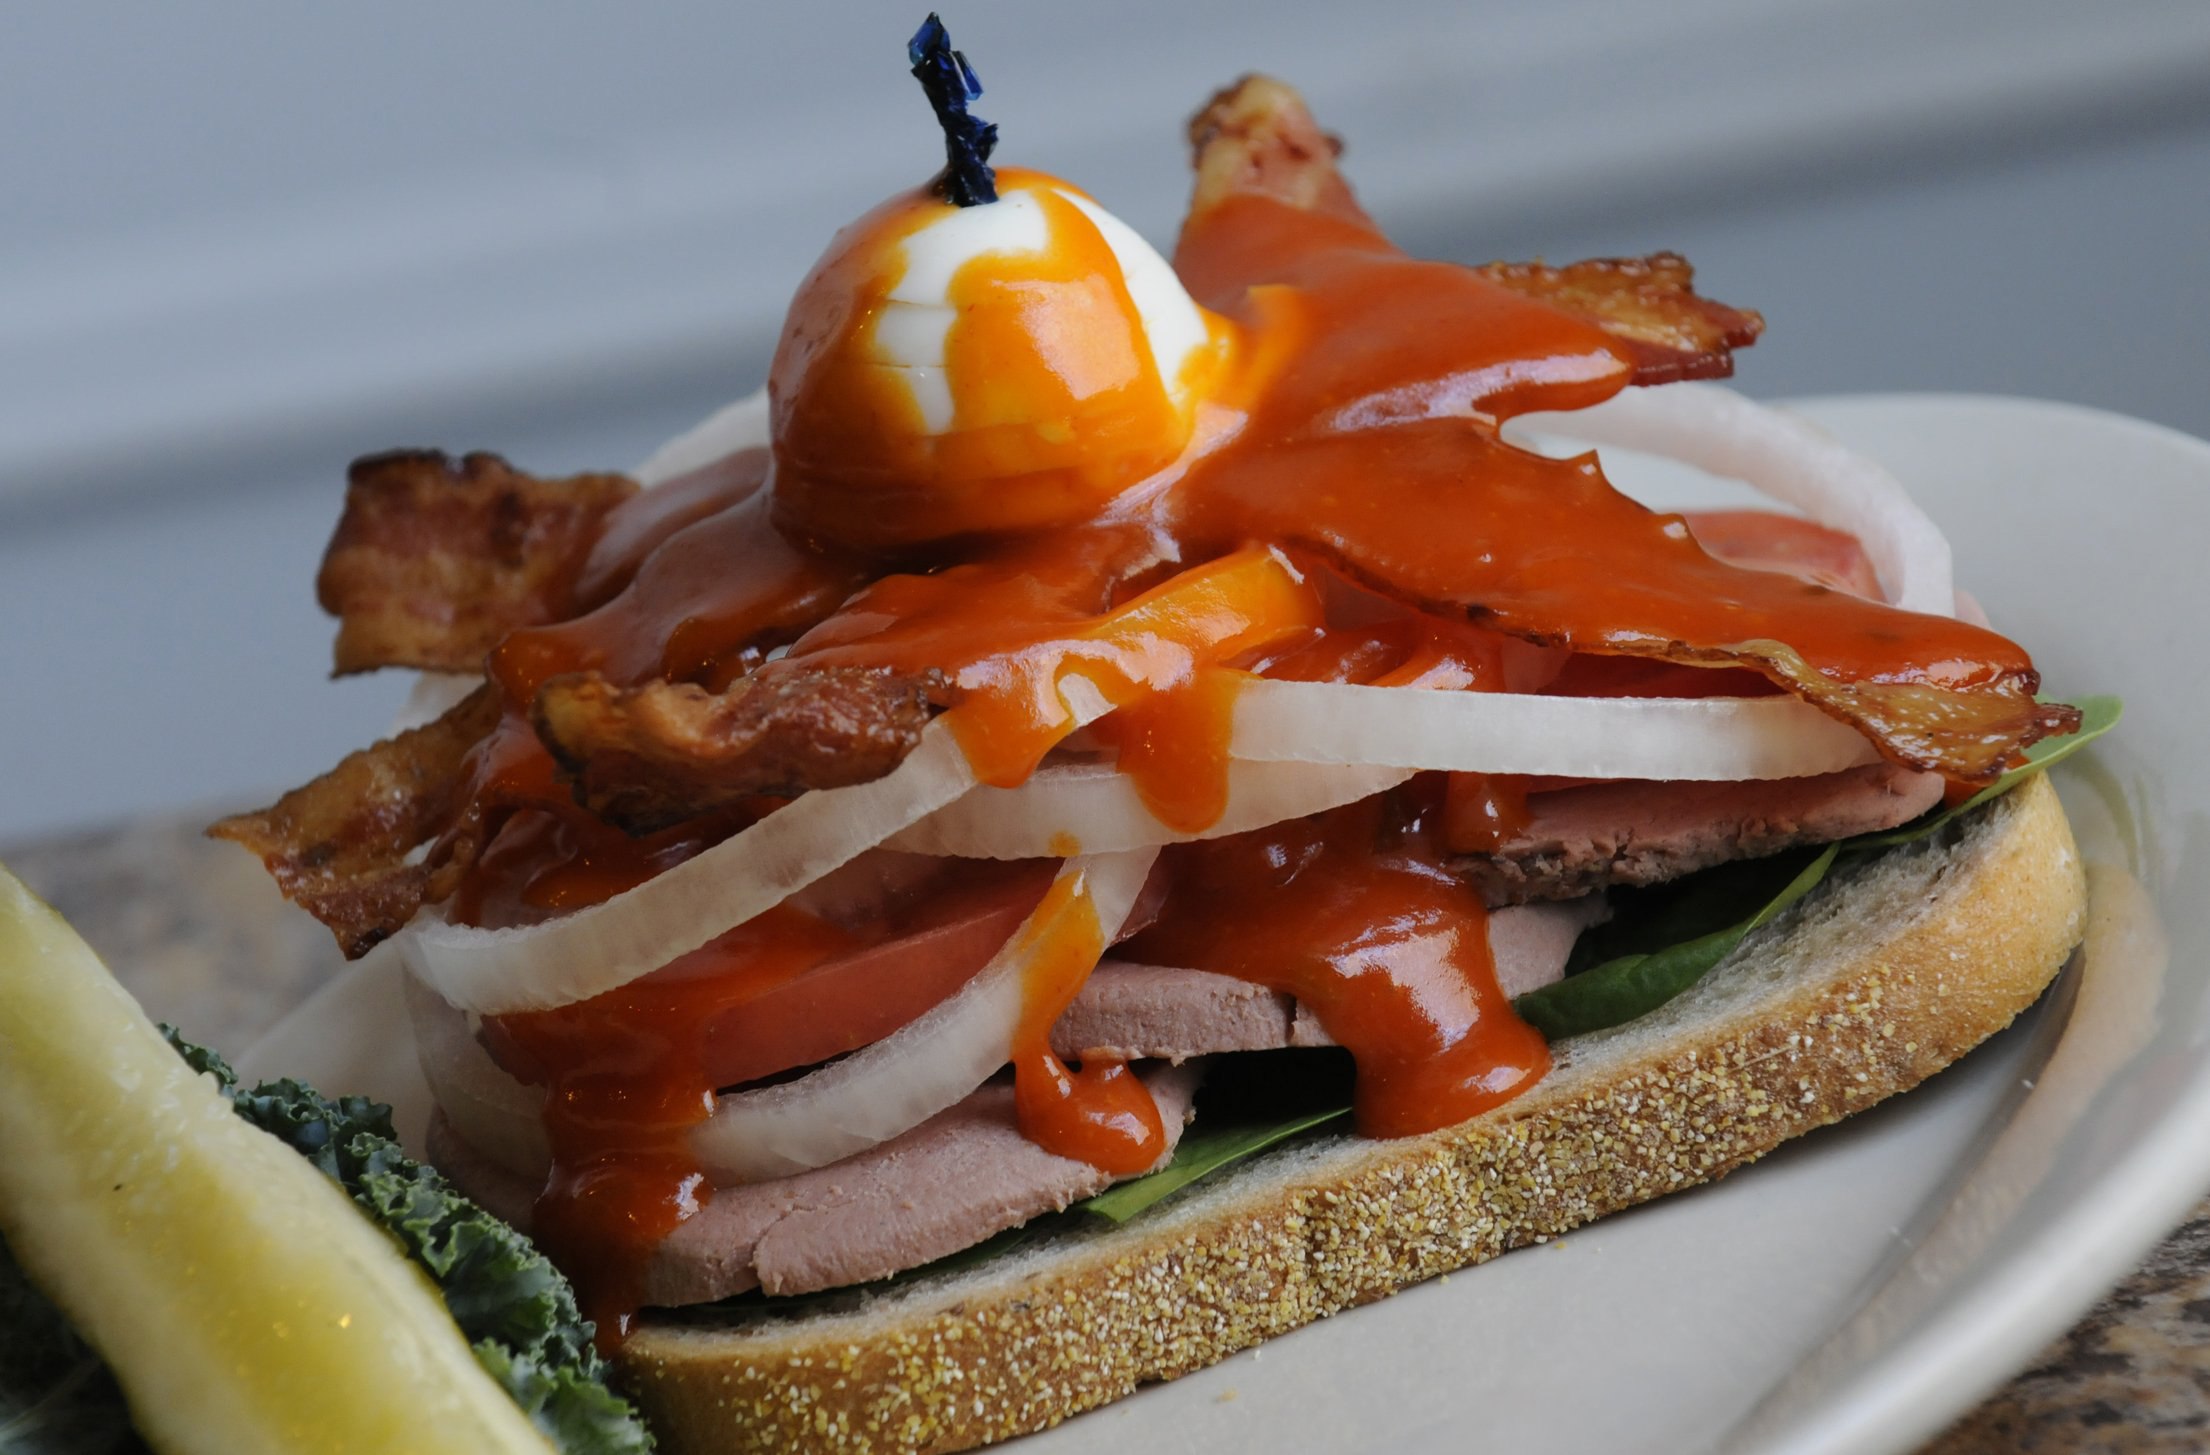 Max's Allegheny Tavern open Bavarian Club sandwich with rye bread, Milwaukee braunschweiger, bacon, sweet onion, tomato spinach & topped with an egg and secret sauce. (Pam Panchak / Post-Gazette )